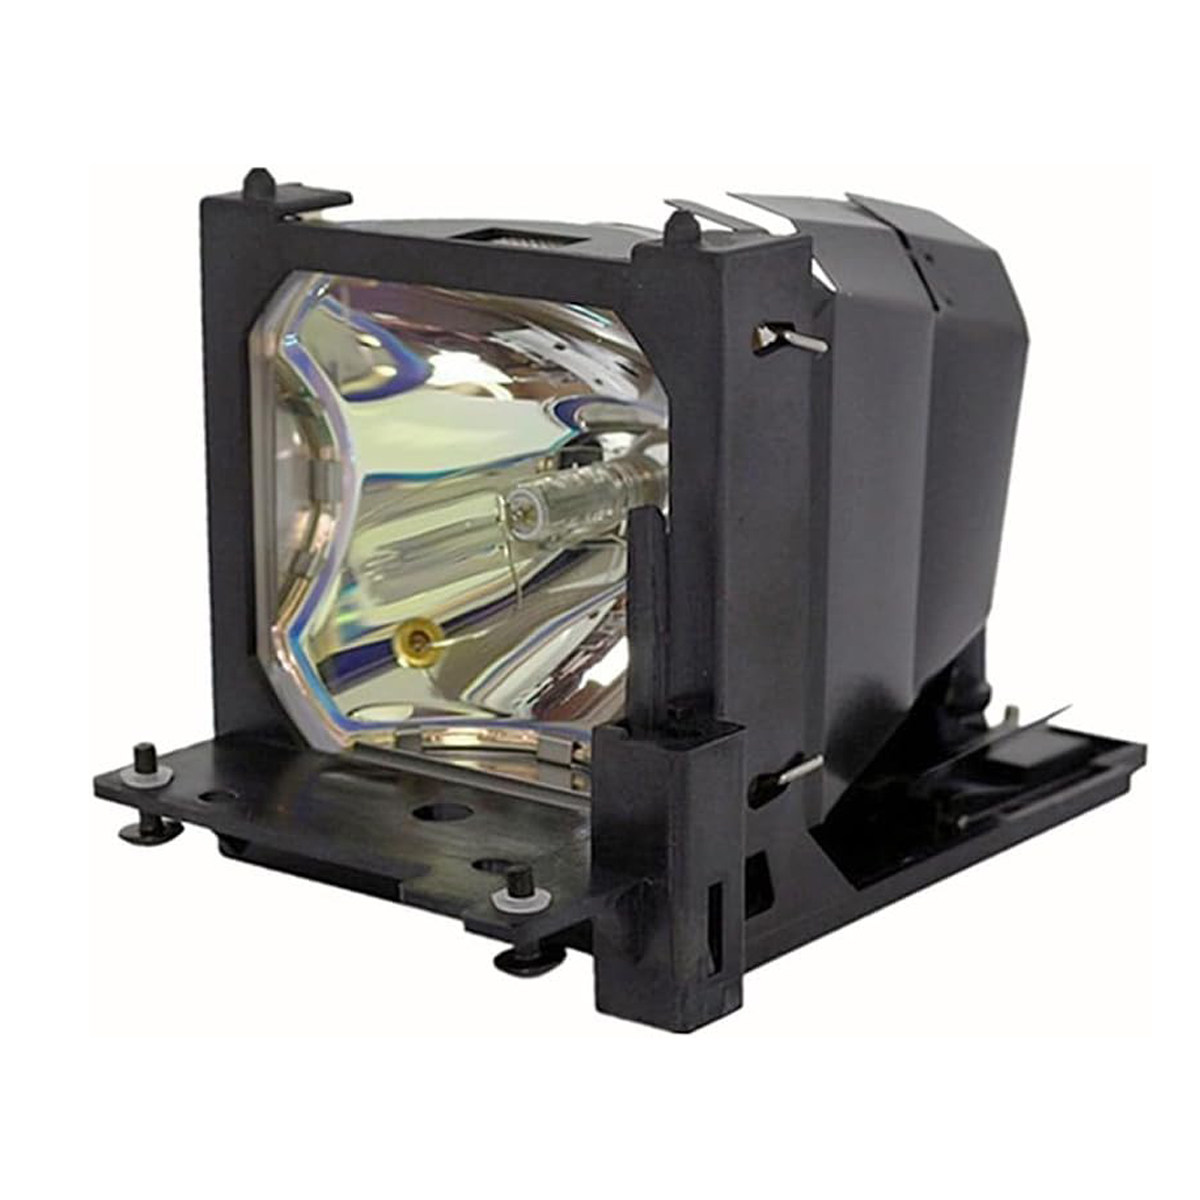 Replacement Projector lamp 78-6969-9547-7 For 3M MP8765 X65